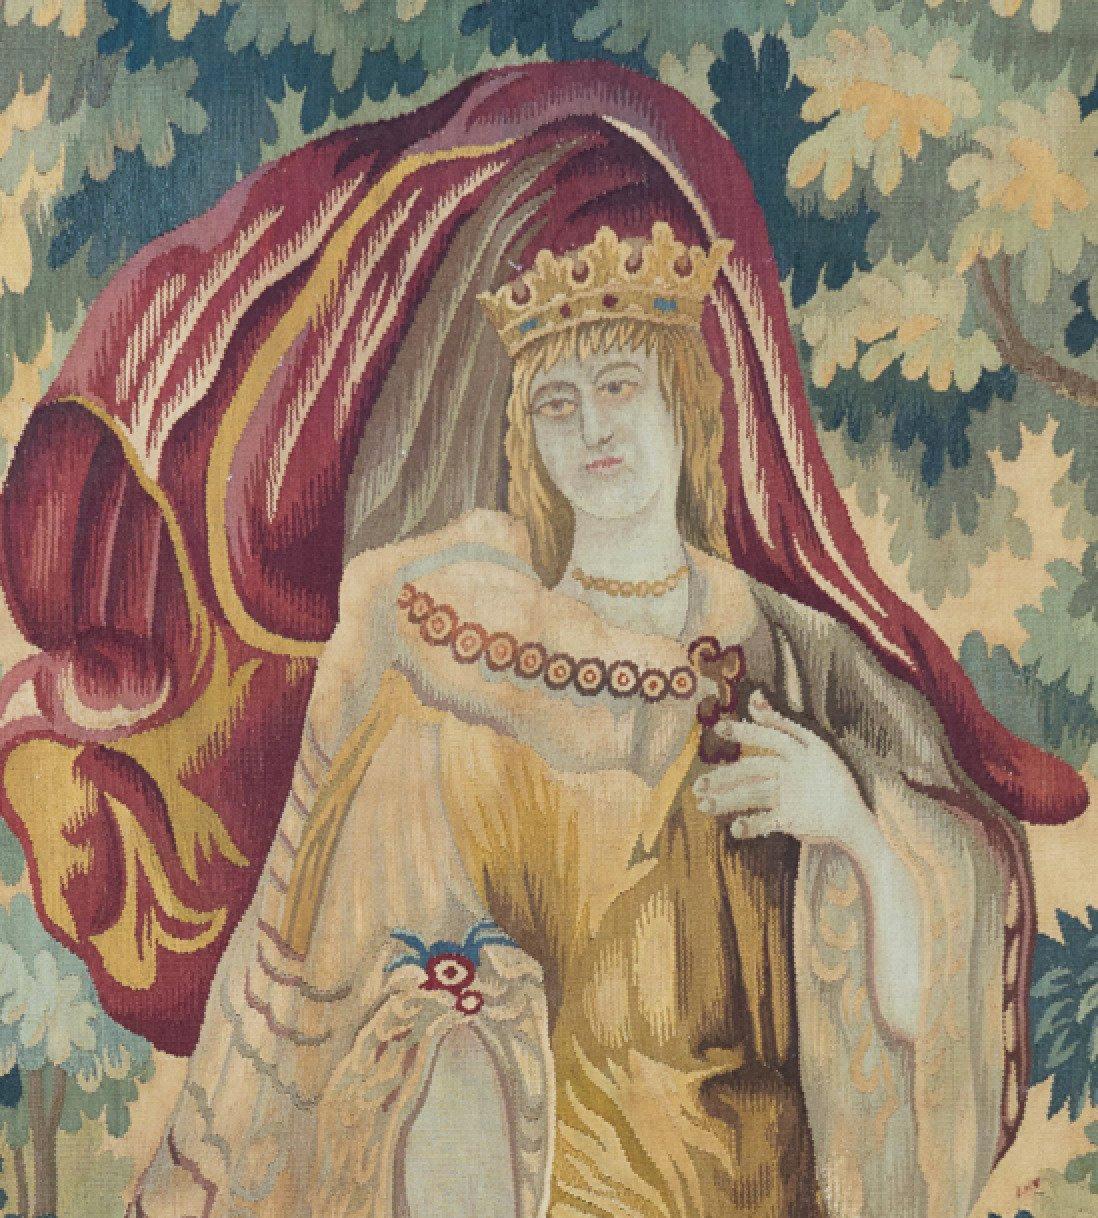 Antique 19th century French Aubusson tapestry depicting a lovely royal woman/ royalty/ queen surrounded by verdant grounds. It measures 4 x 6.5 ft.

Provenance:
Purchased from Doyle Auction House, New York, NY in January 1993.





 